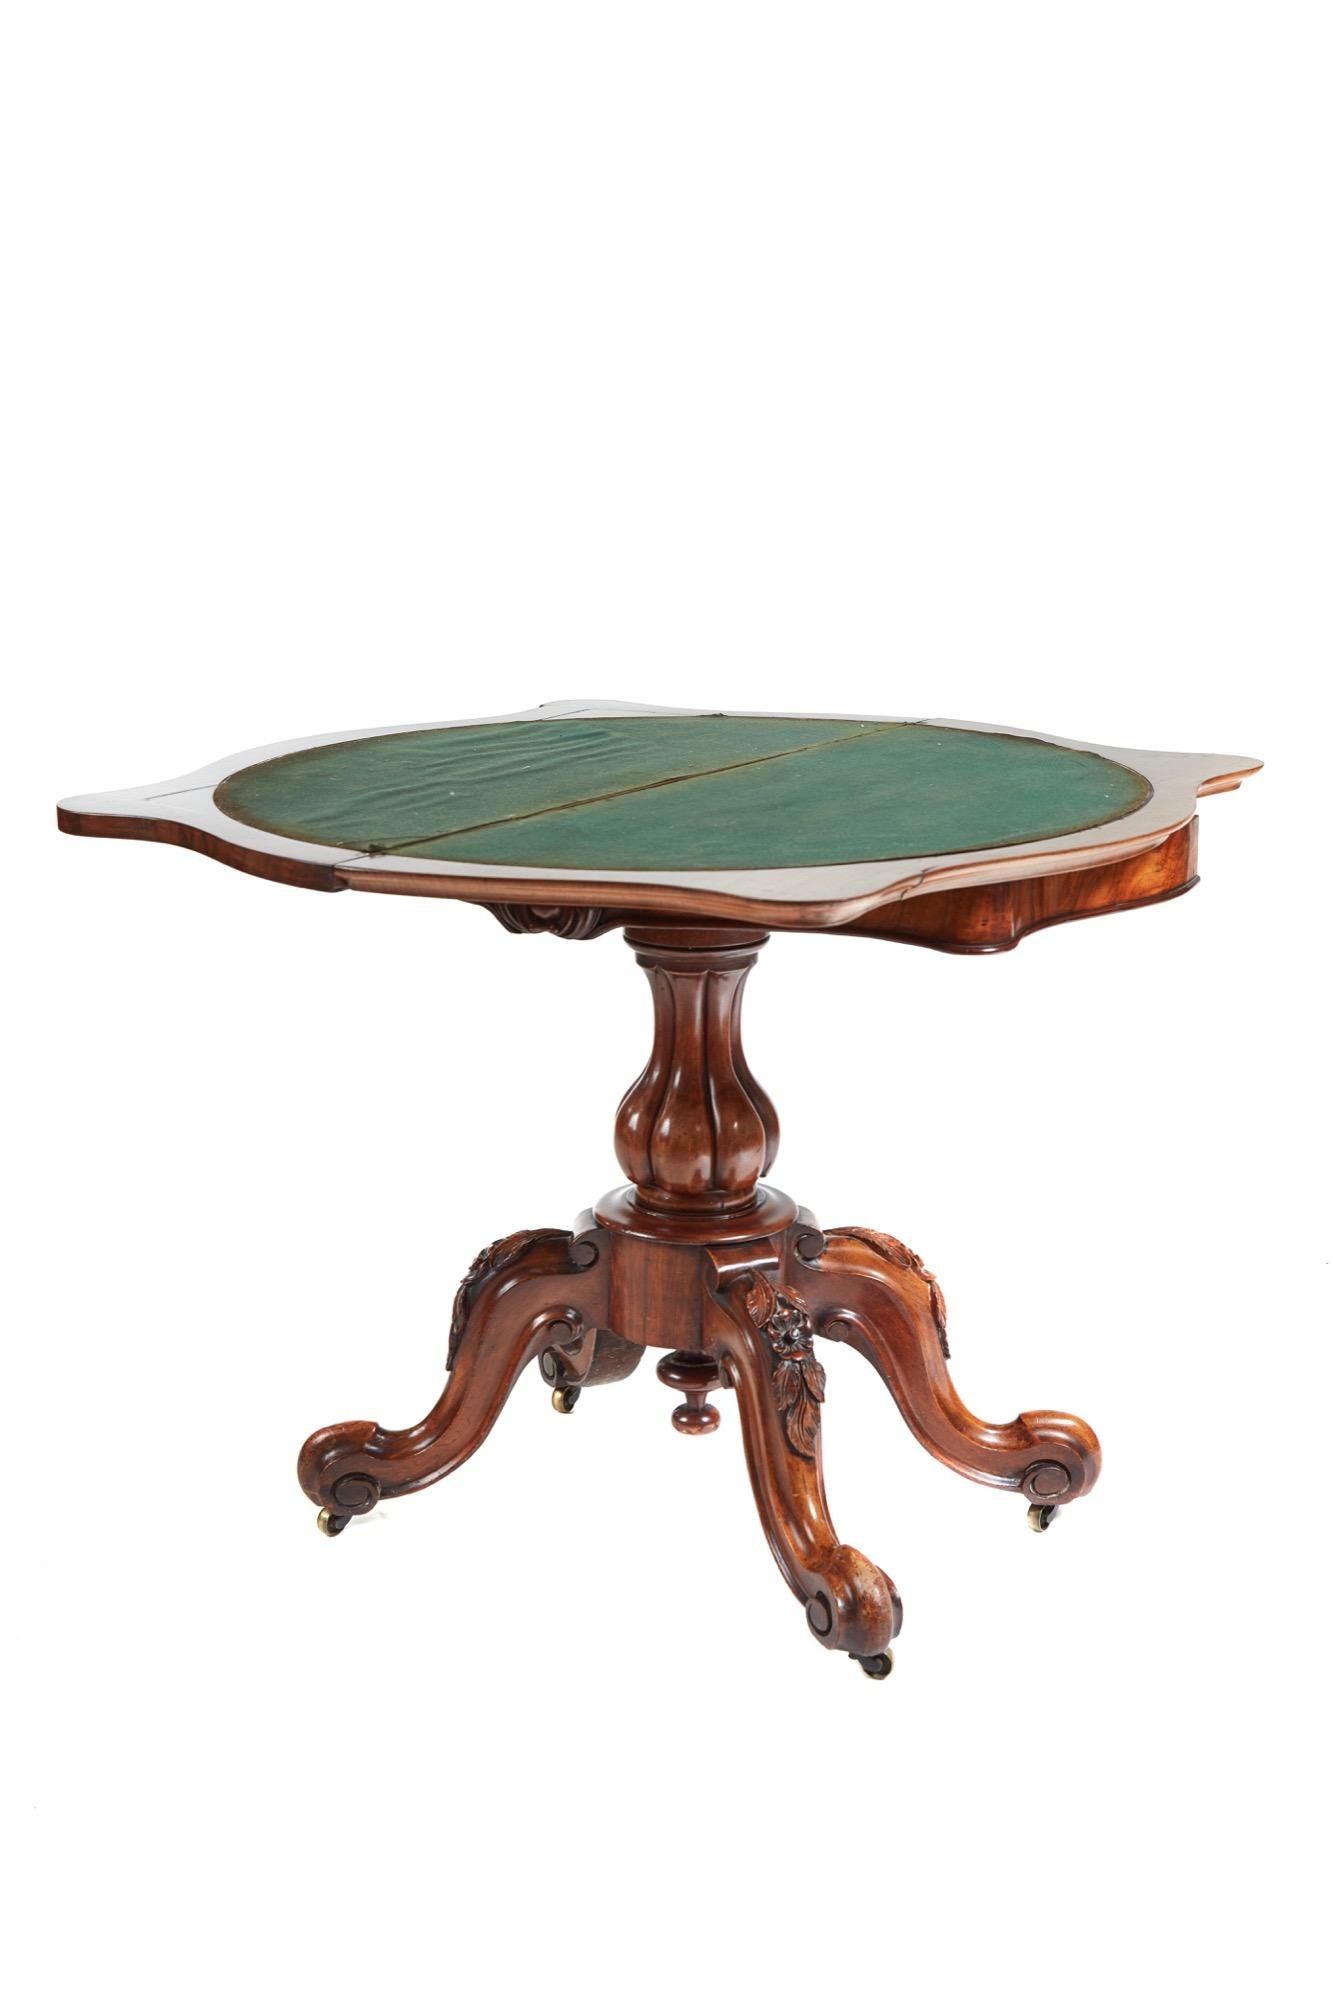 A good quality Victorian burr walnut serpentine shaped card/side table with swivel top, green baize interior, serpentine carved frieze, shaped reeded column supported by four carved shaped cabriole legs on original castors.

Lovely color and